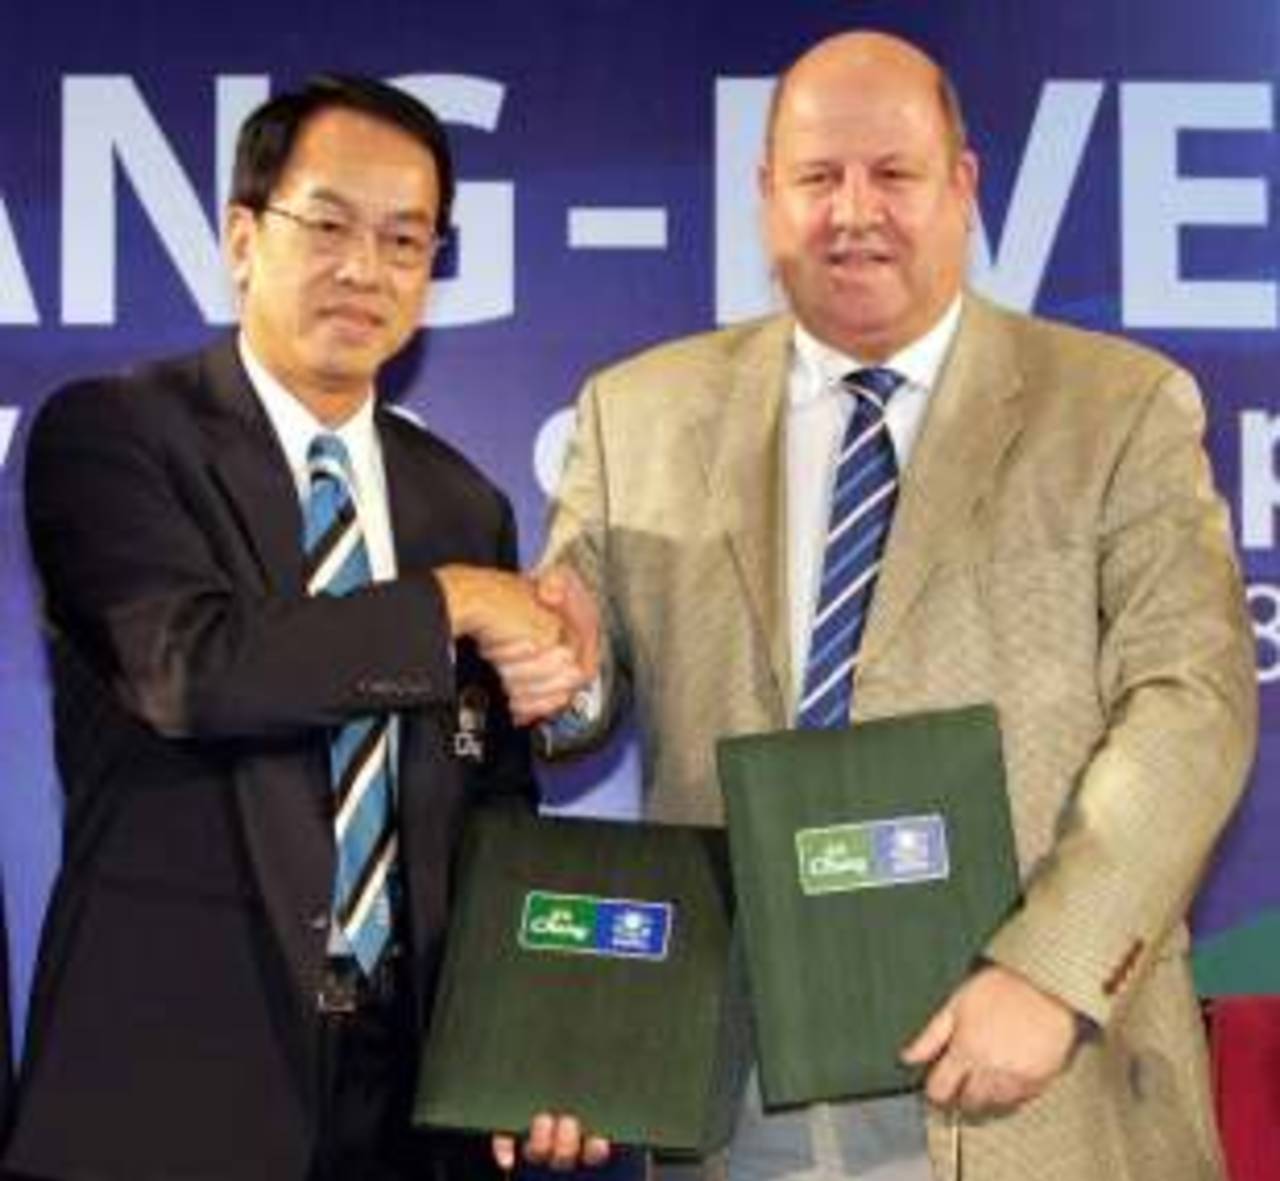 Somchai Suttikulpanich, deputy senior manager of the Thai Beverage Marketing (L) shakes hands with Everton FC Chief Excutive Officer Keith Wyness (R) during a press conference for a sponsorship deal in Bangkok, 17 January 2008